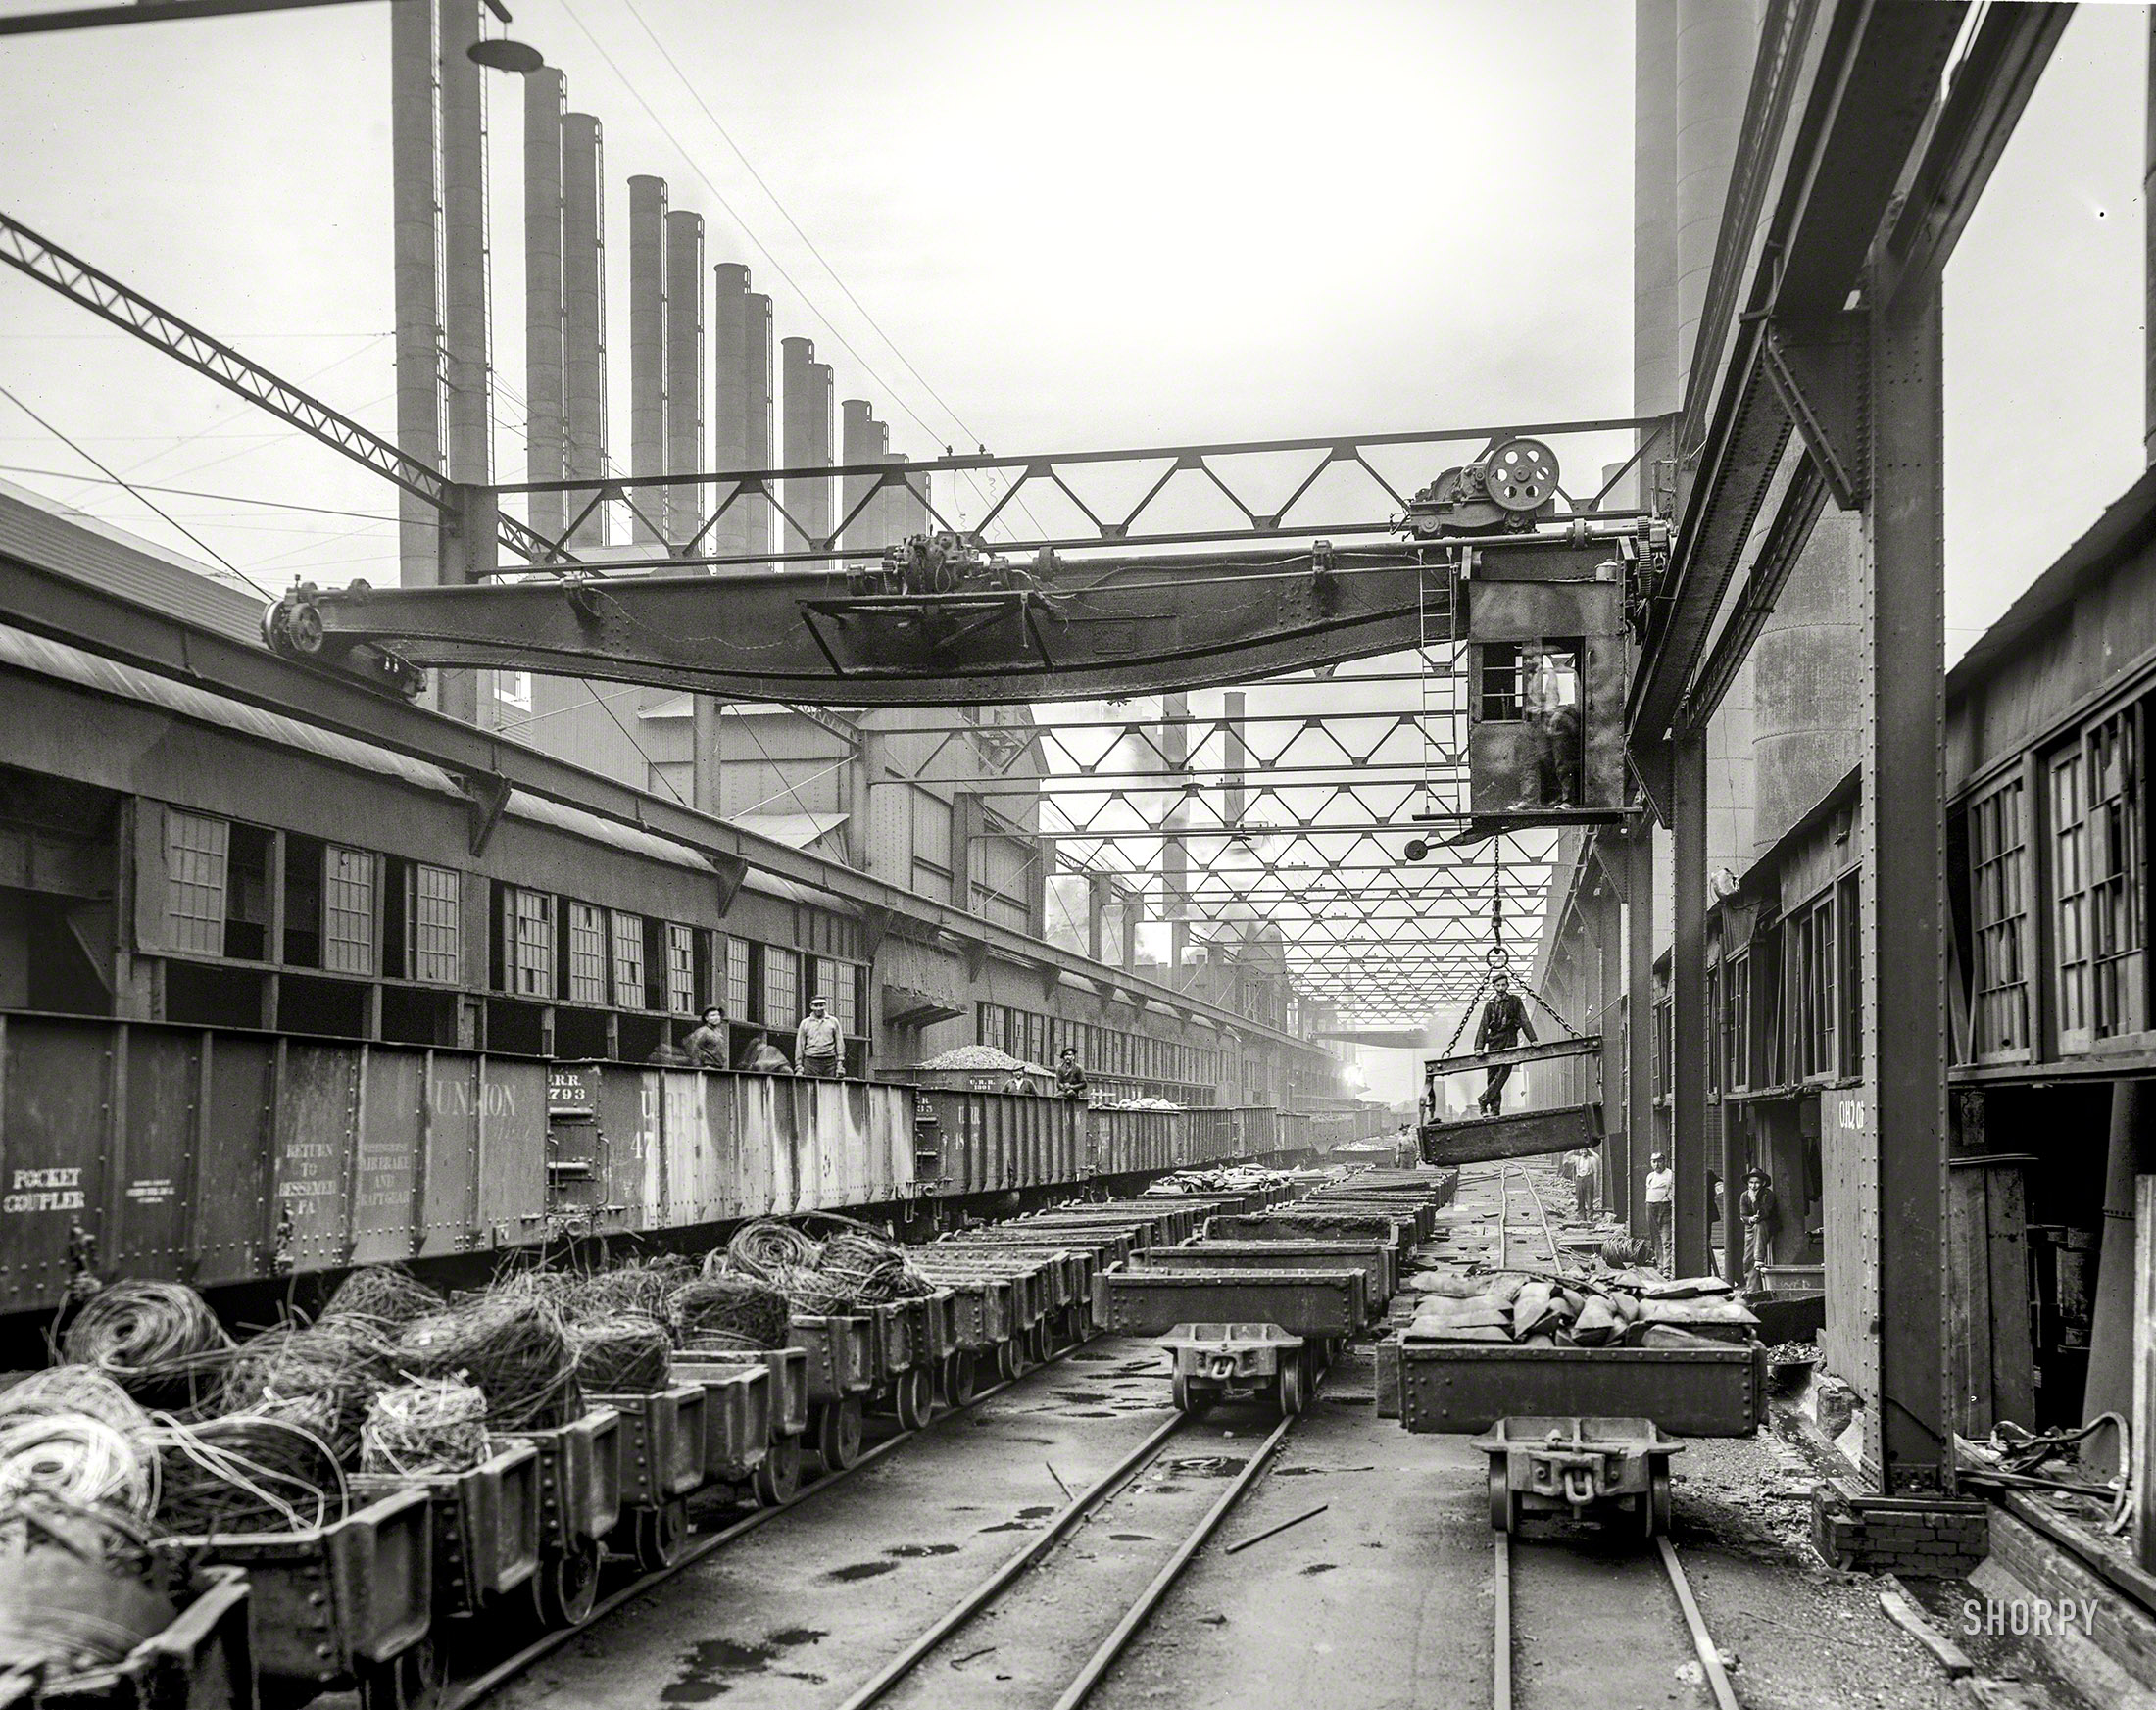 1908. "Loading scrap. Homestead Steel Works, Homestead, Pennsylvania." 8x10 inch dry plate glass negative, Detroit Publishing Company. View full size.